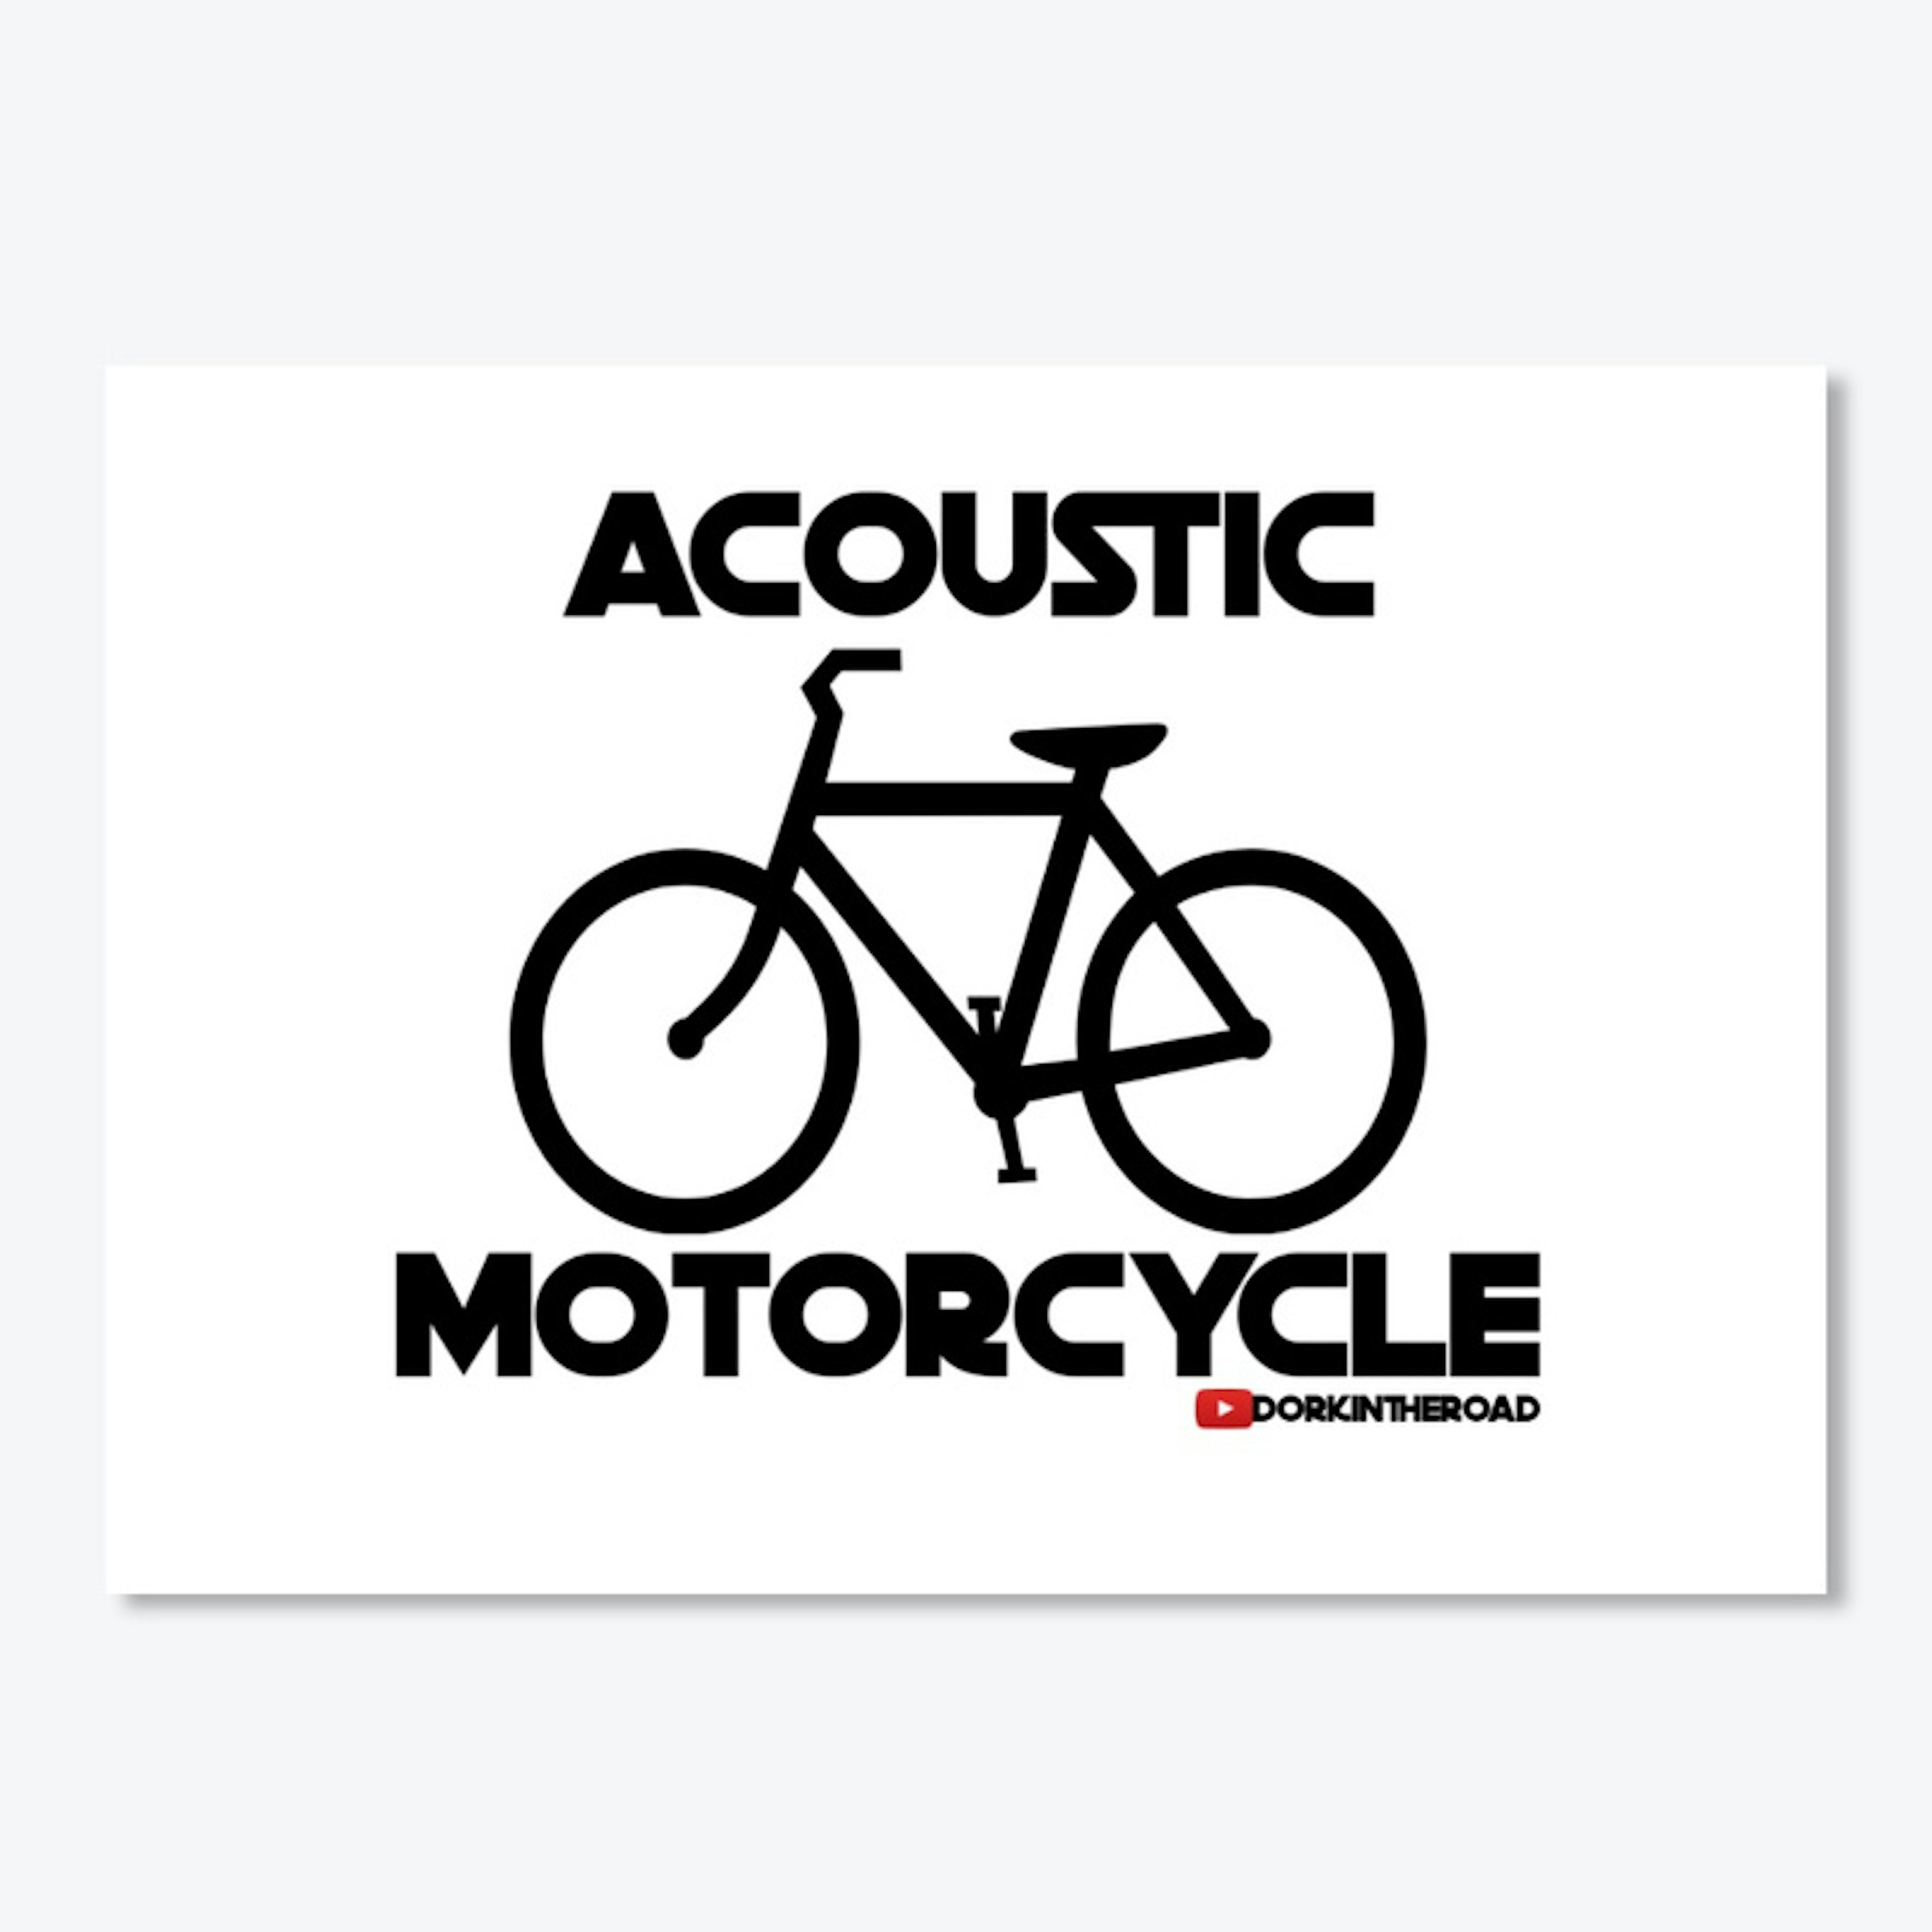 Acoustic Motorcycle